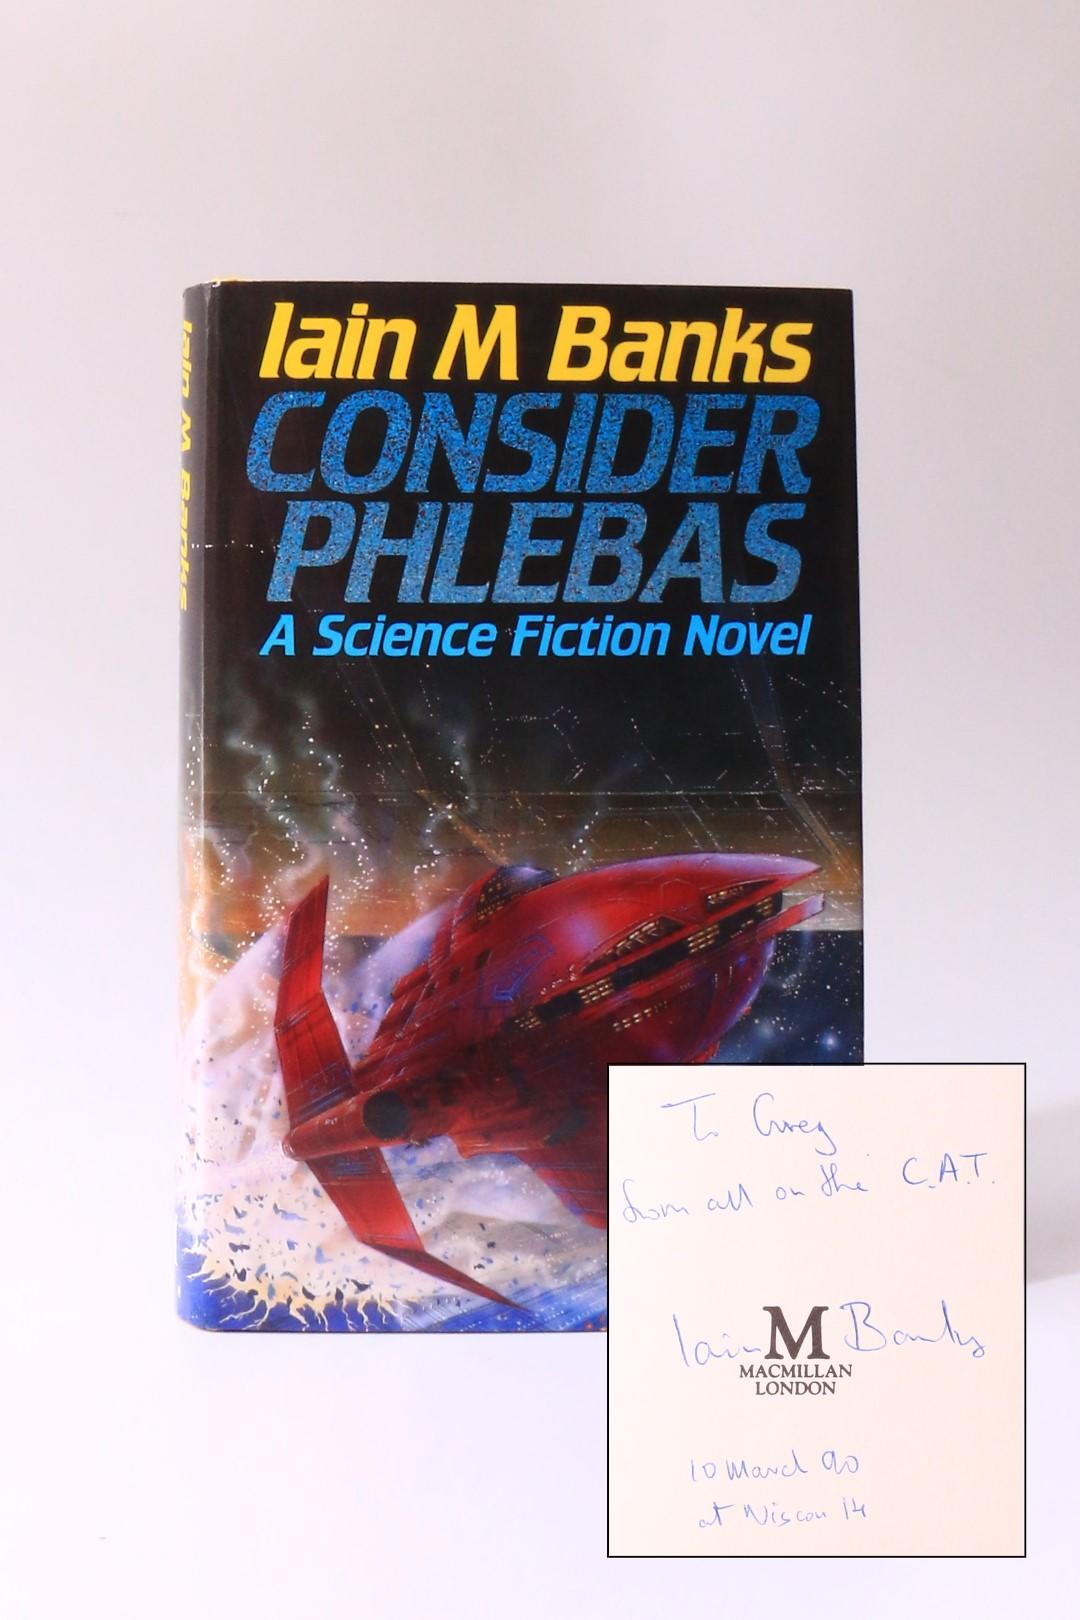 Iain M. Banks - Consider Phlebas - Macmillan & Co., 1987, Signed First Edition.